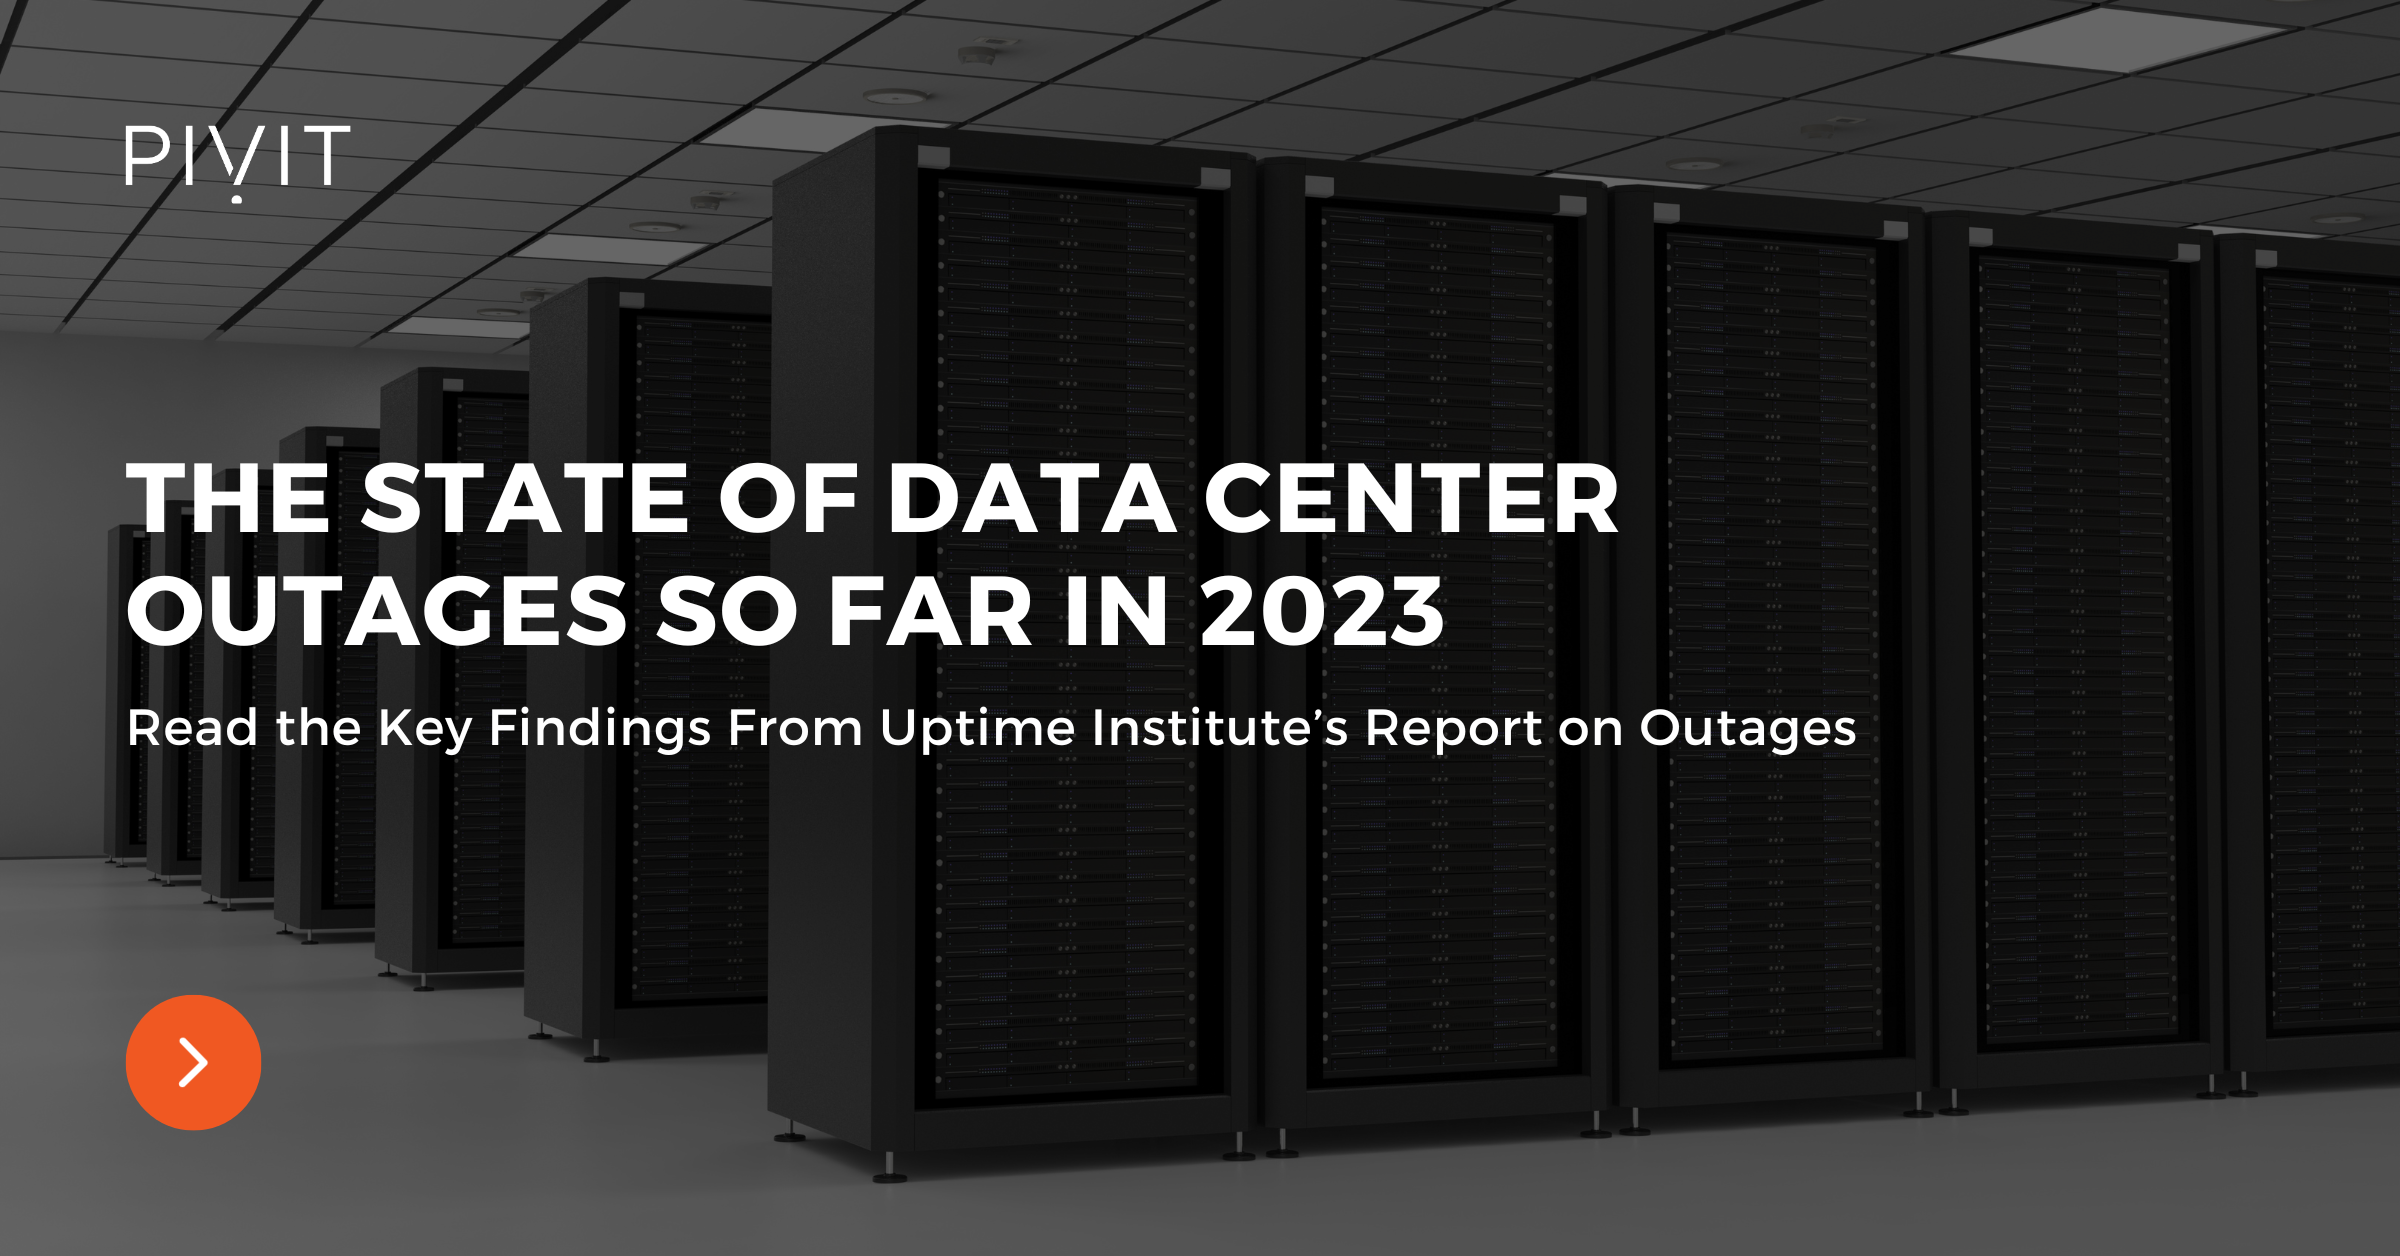 The State of Data Center Outages So Far in 2023